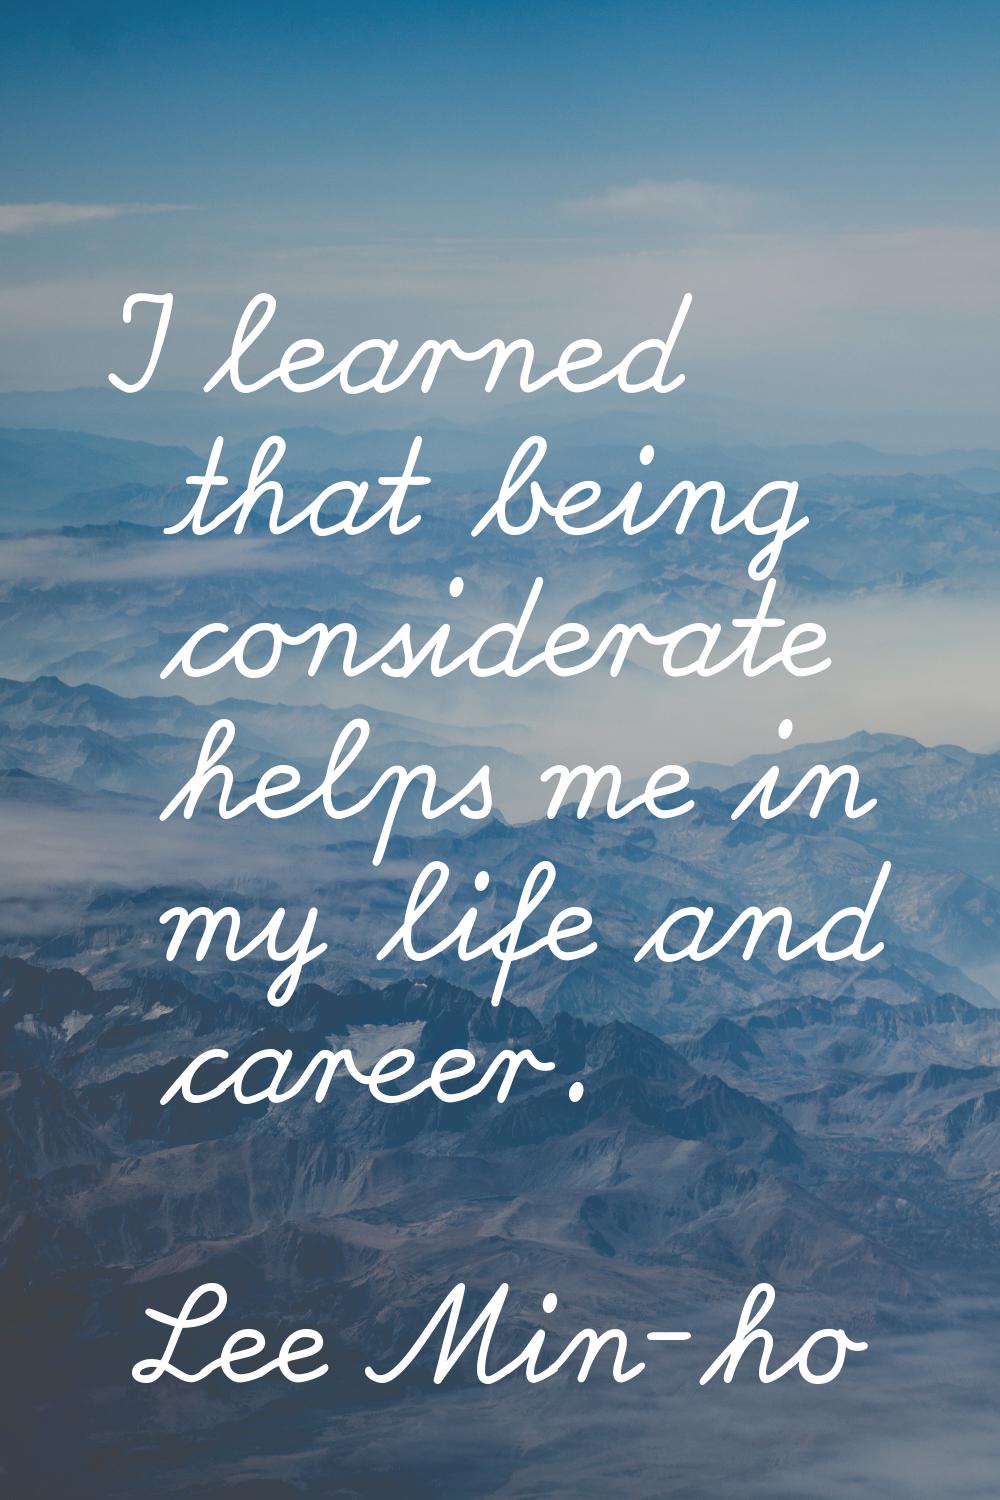 I learned that being considerate helps me in my life and career.